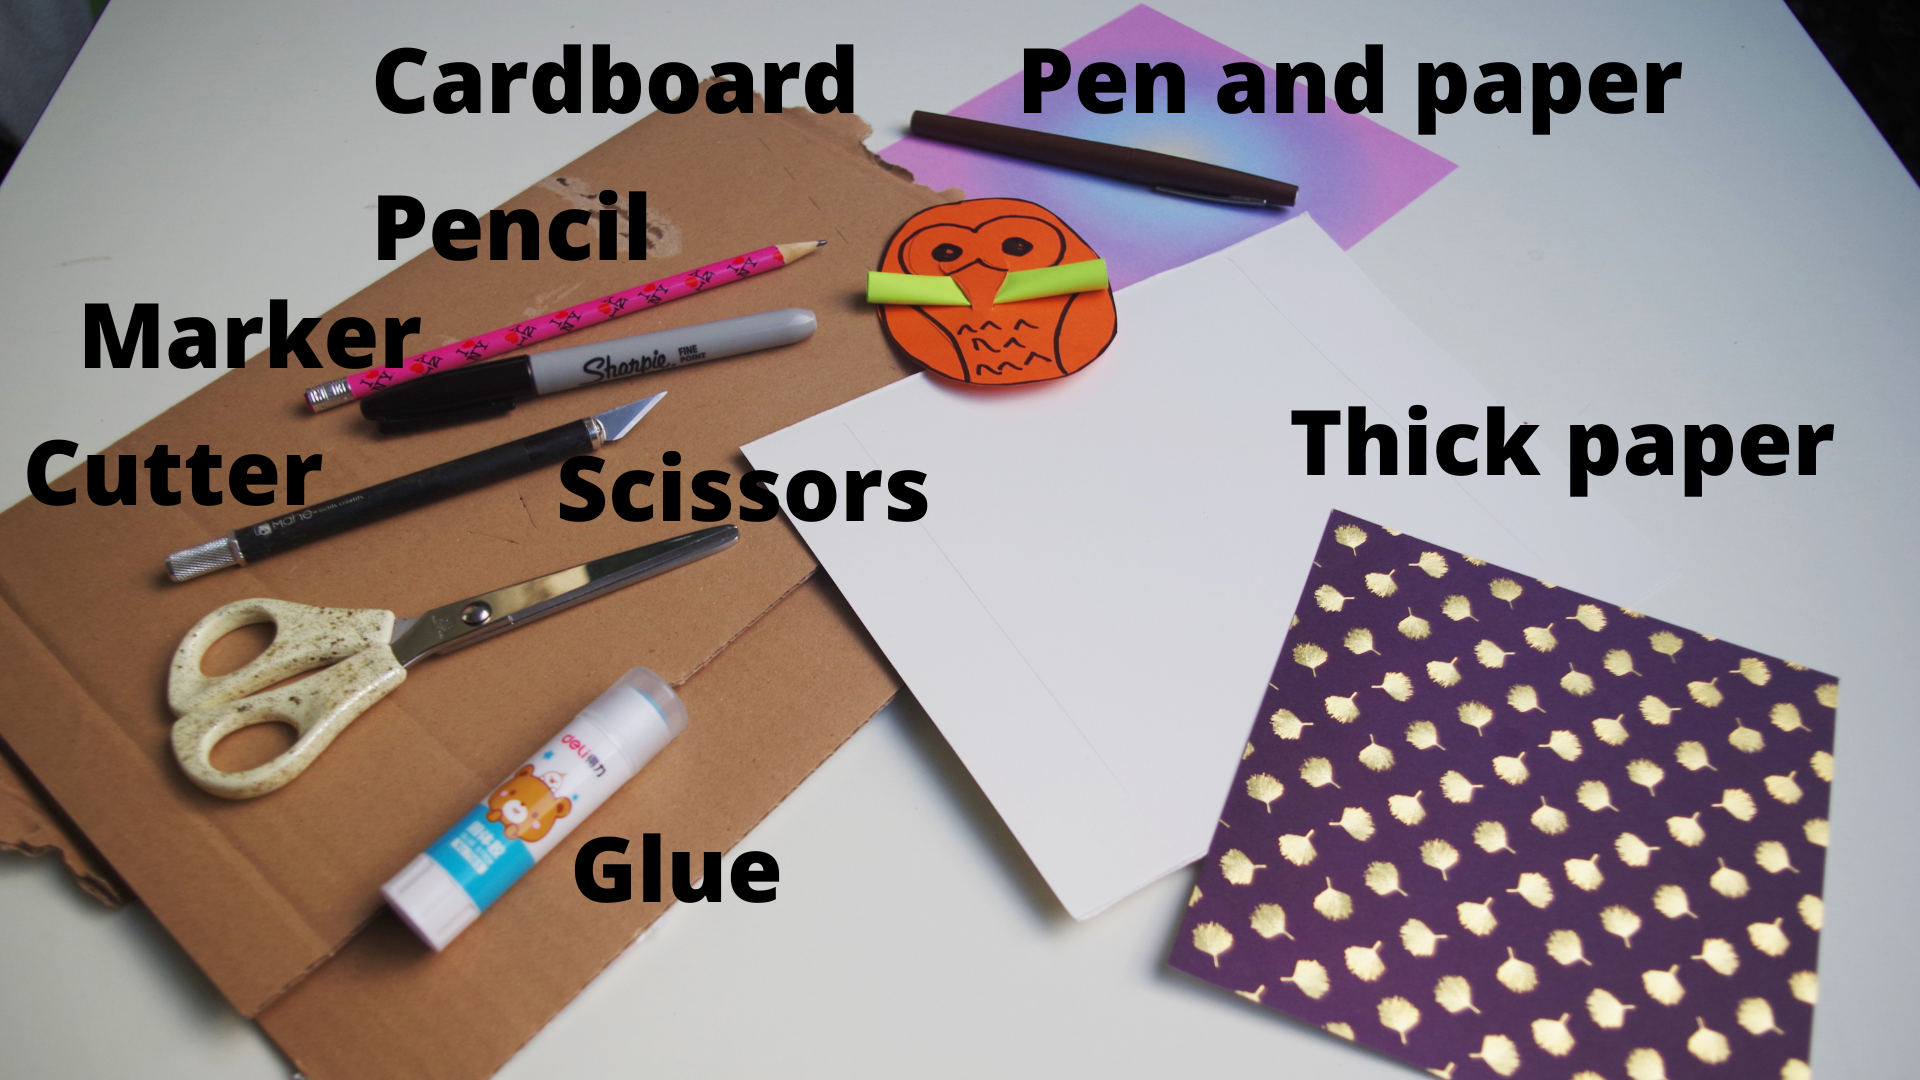 Supplies to make custom secret message owl cards arranged over a surface. Supplies include cardboard, pen and paper, thick crafting paper, glue, scissors, markers, and something to cut with